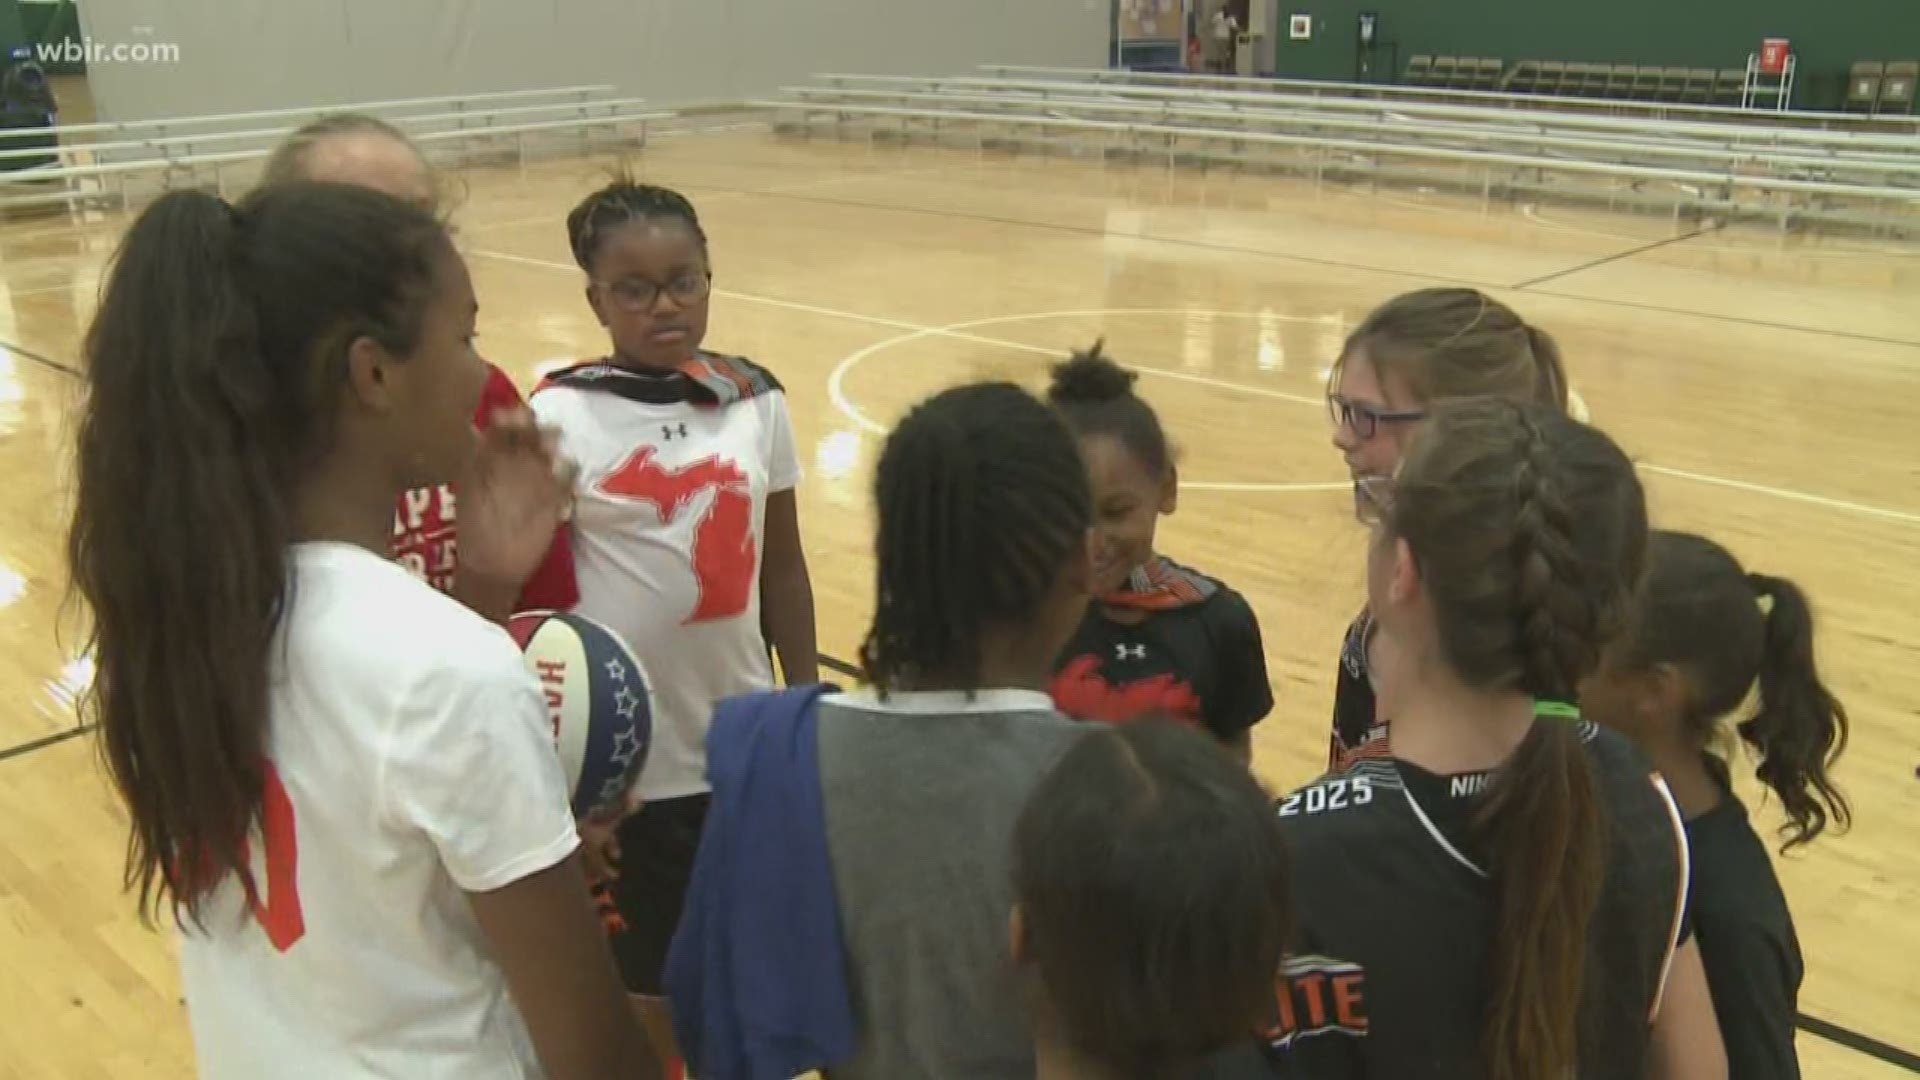 The Pat Summitt Leadership group teamed up with AAU basketball to put on a first-time event to help teach players valuable life lessons and keys to success both on and off the court.